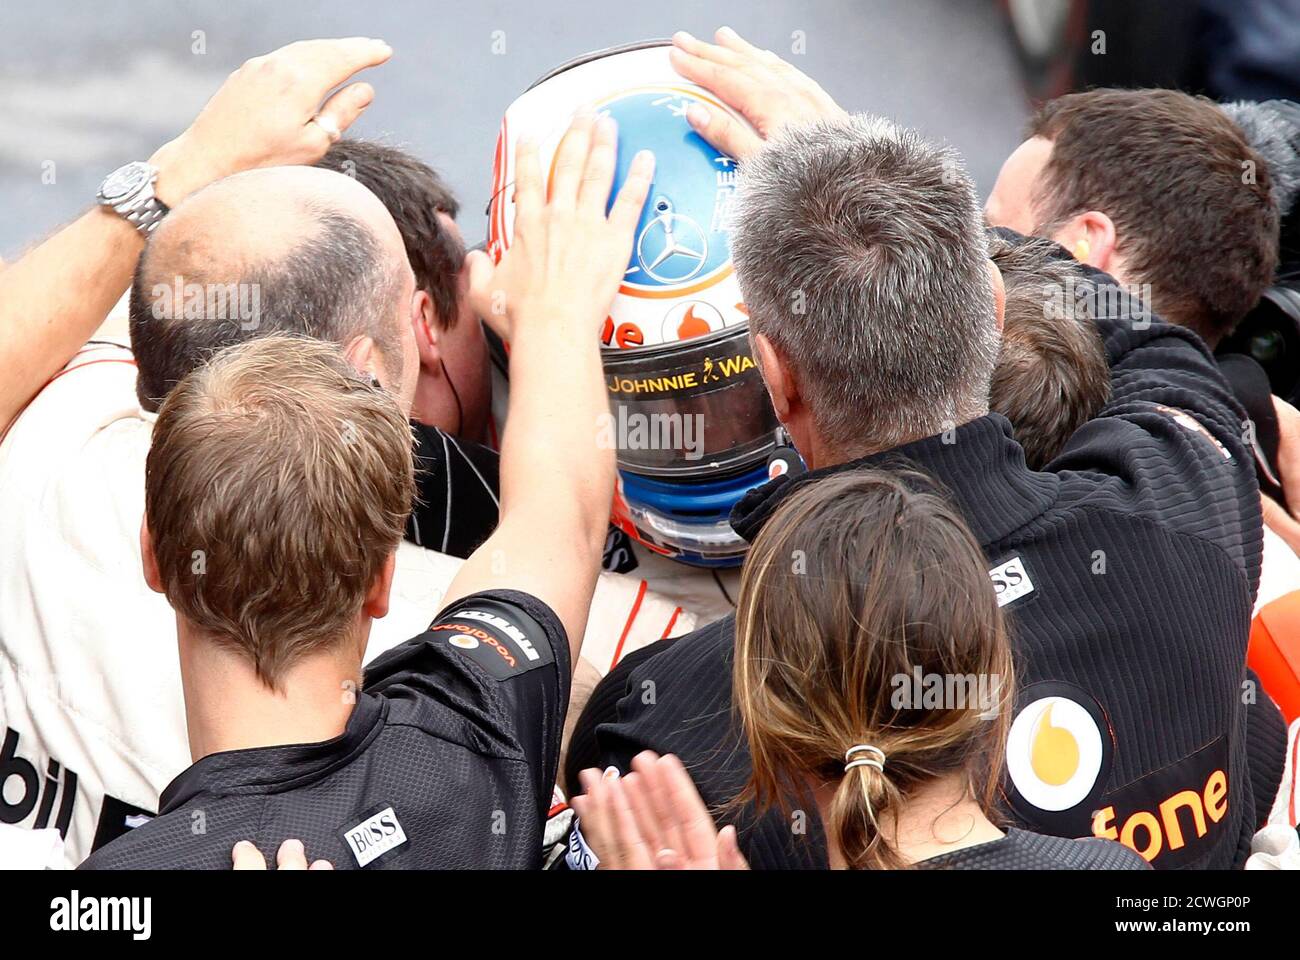 McLaren Formula One driver Jenson Button of Britain is congratulated by his team after winning the Canadian F1 Grand Prix at the Circuit Gilles Villeneuve in Montreal June 12, 2011.     REUTERS/Chris Wattie (CANADA  - Tags: SPORT MOTOR RACING) Stock Photo